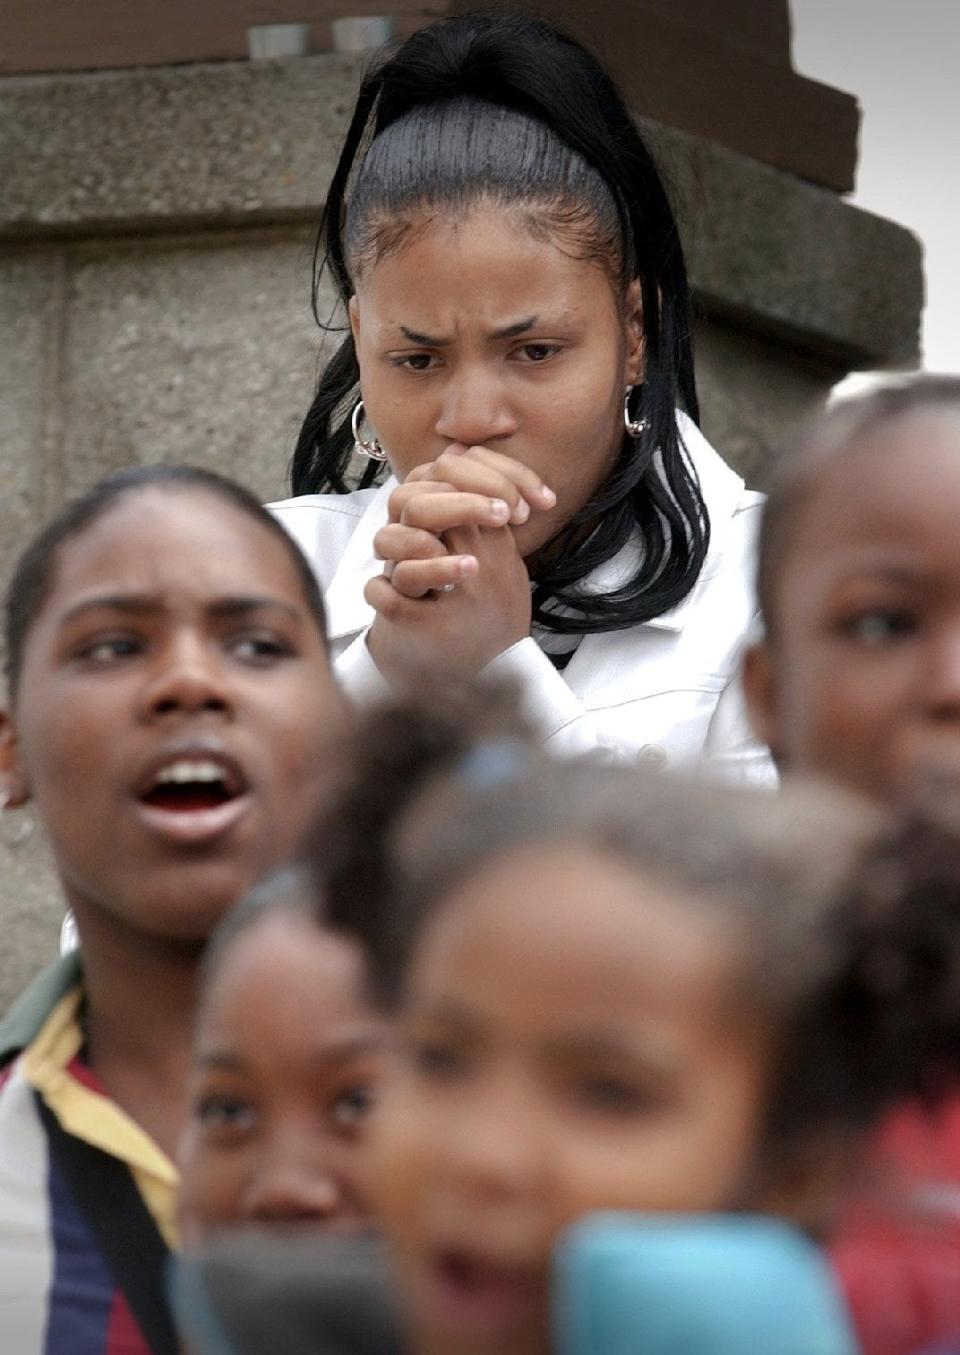 Ayanna Patterson prays for the safe return of her missing daughter, Alexis, in this 2002 file photo.